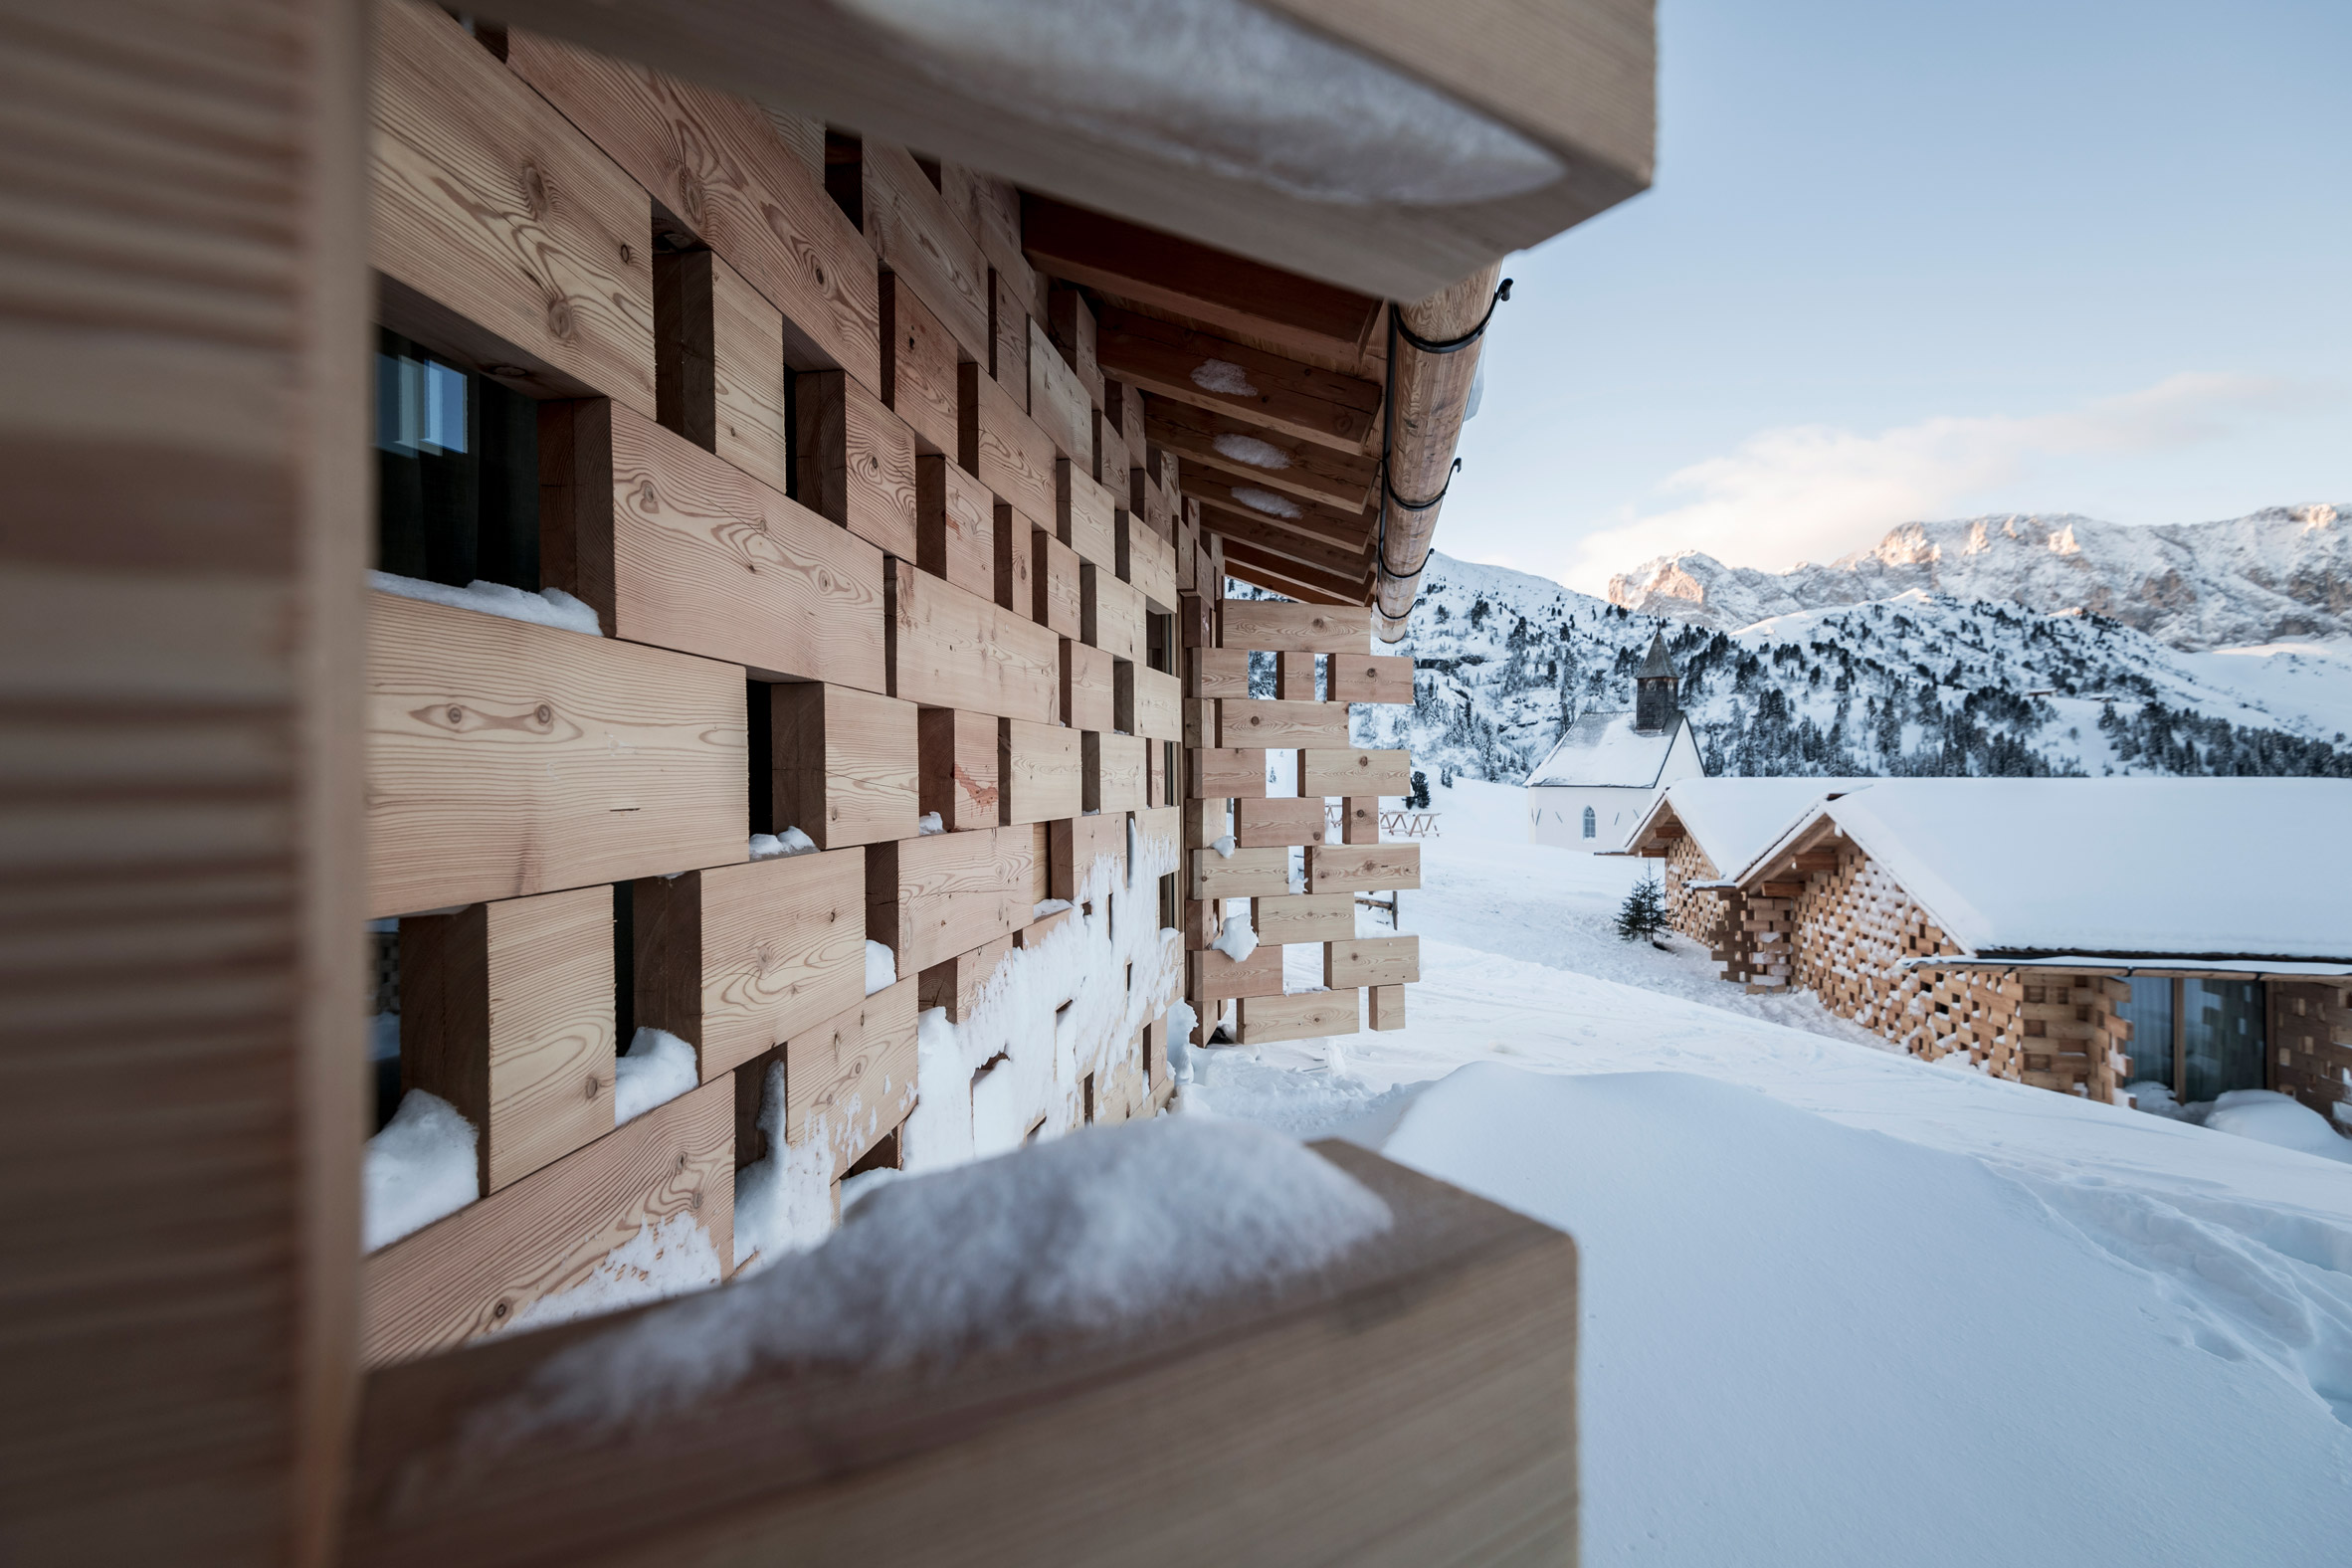 NOA extends historic Alpine retreat with cluster of cosy wooden chalets